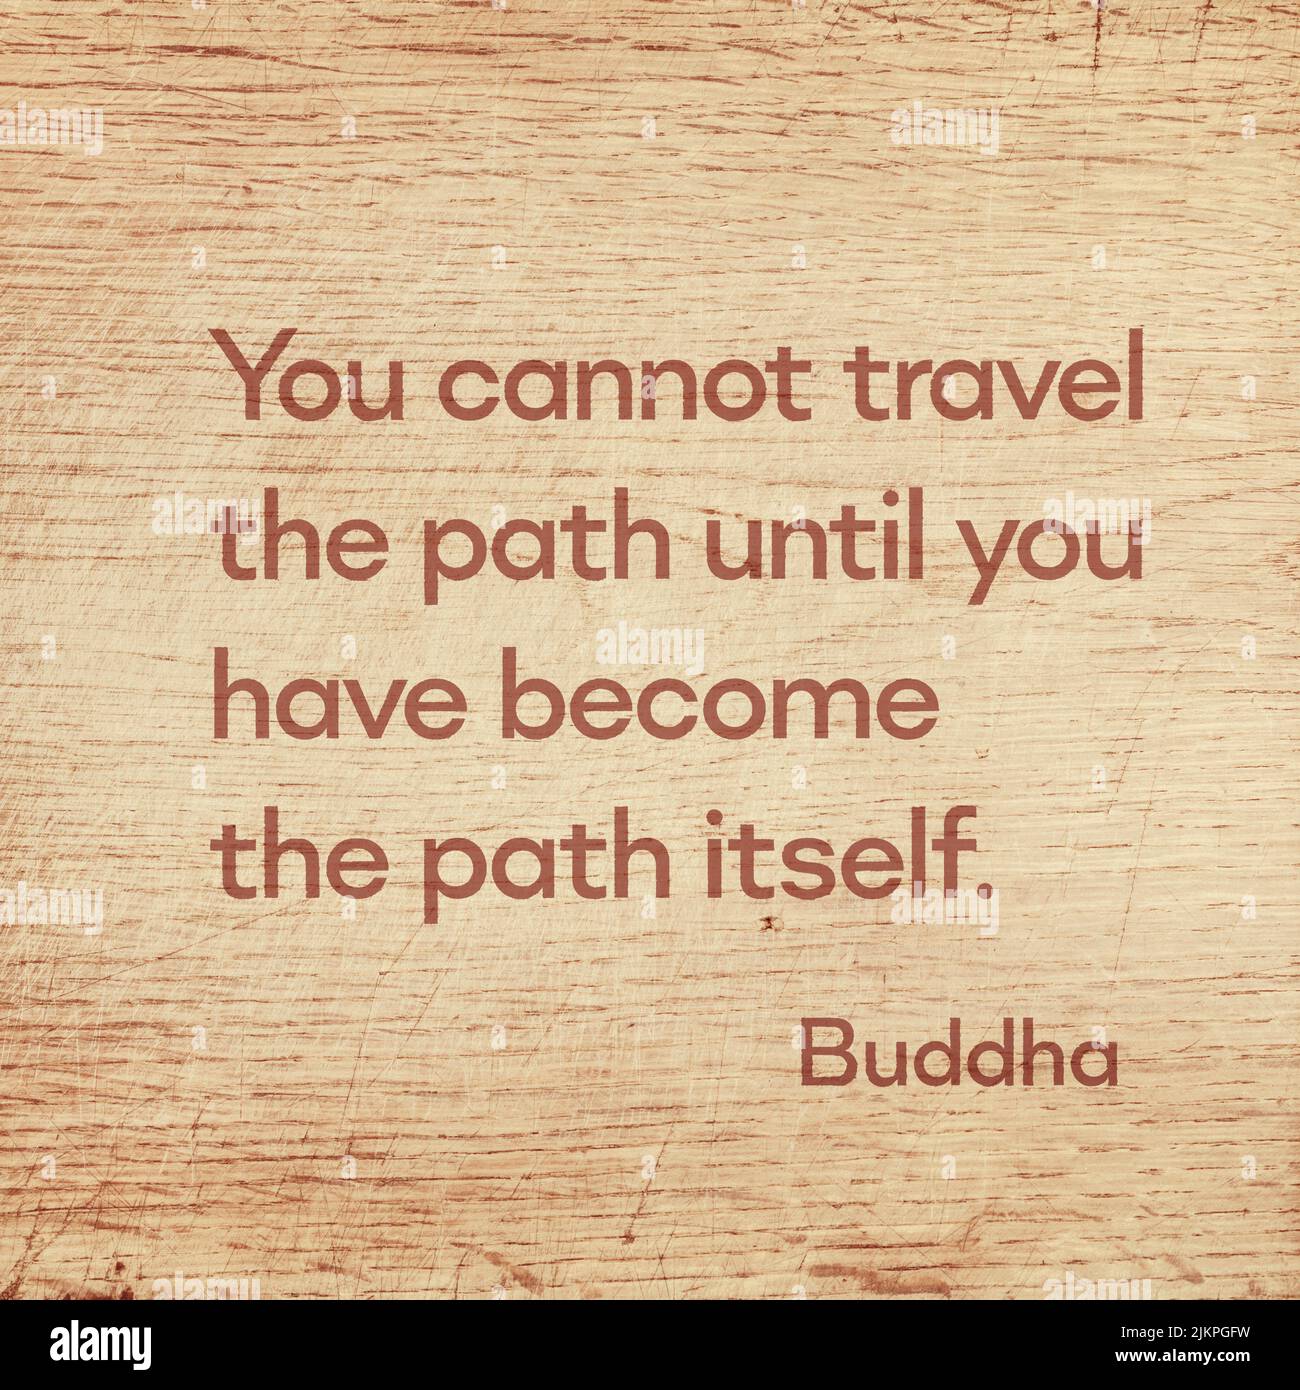 You cannot travel the path until you have become the path itself - famous quote of Gautama Buddha printed on grunge wooden board Stock Photo